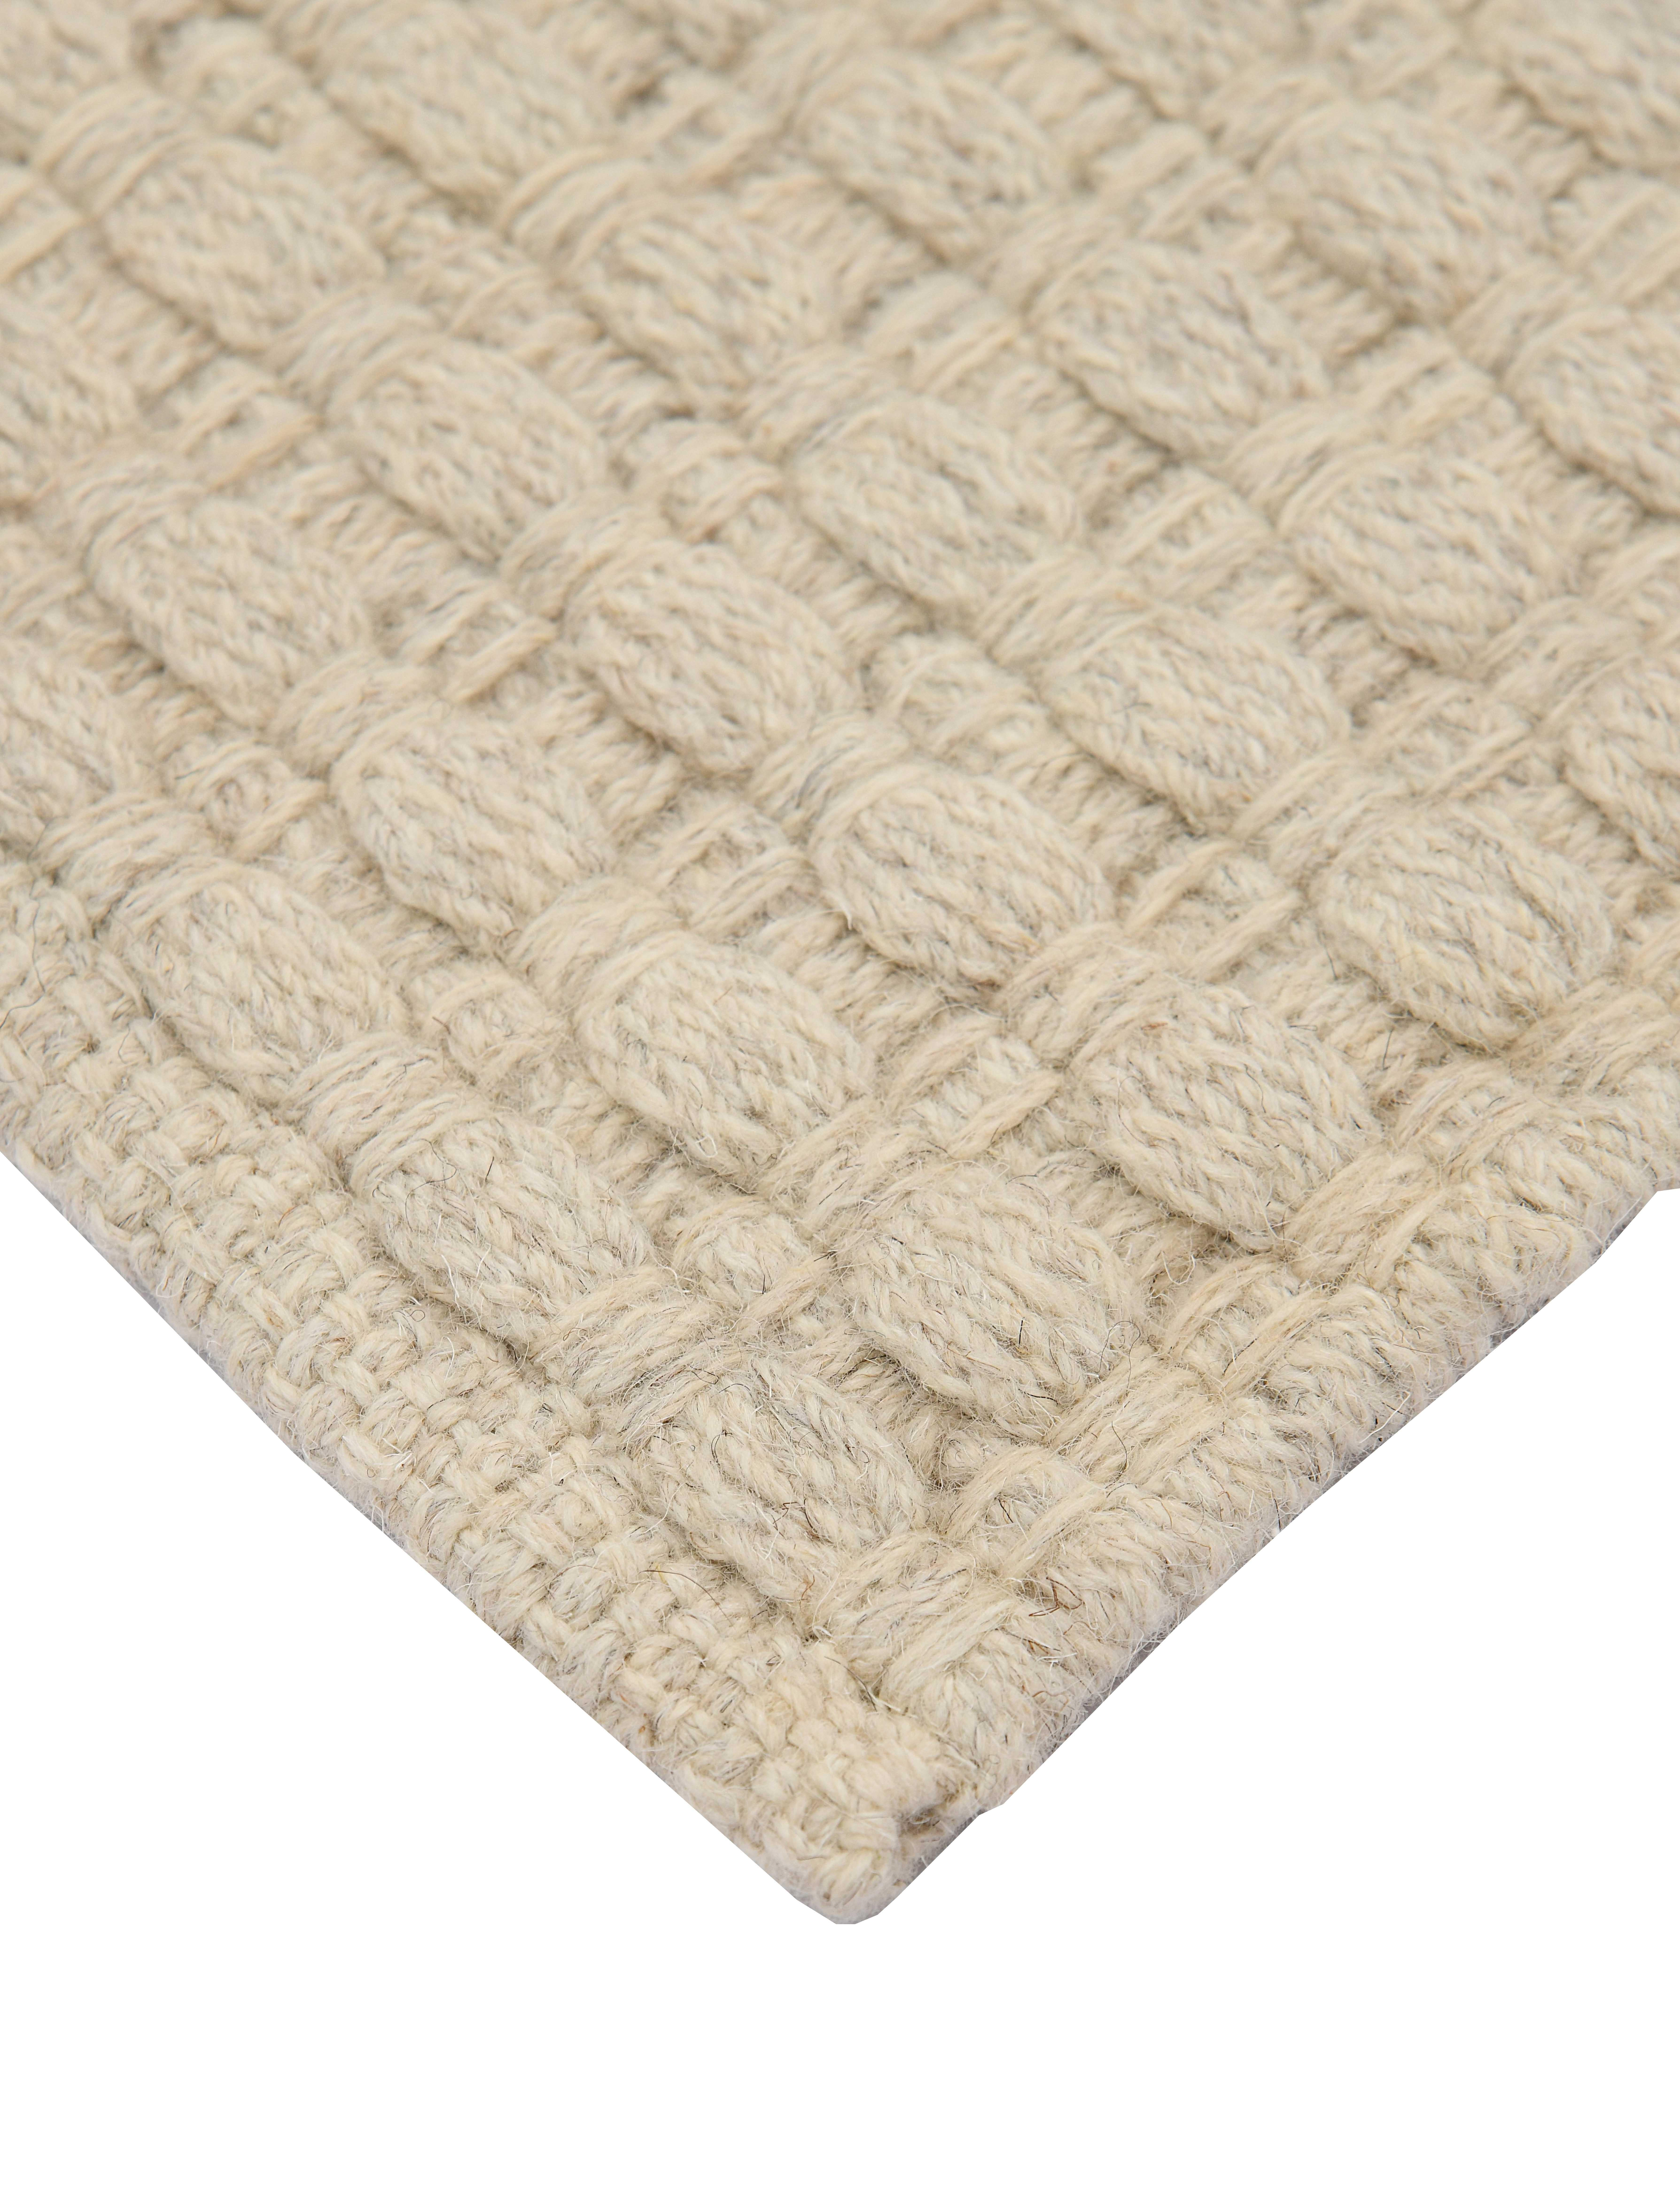 Indian Una, Ash, Handwoven Face 60% Undyed NZ Wool, 40% Undyed MED Wool, 8' x 10' For Sale